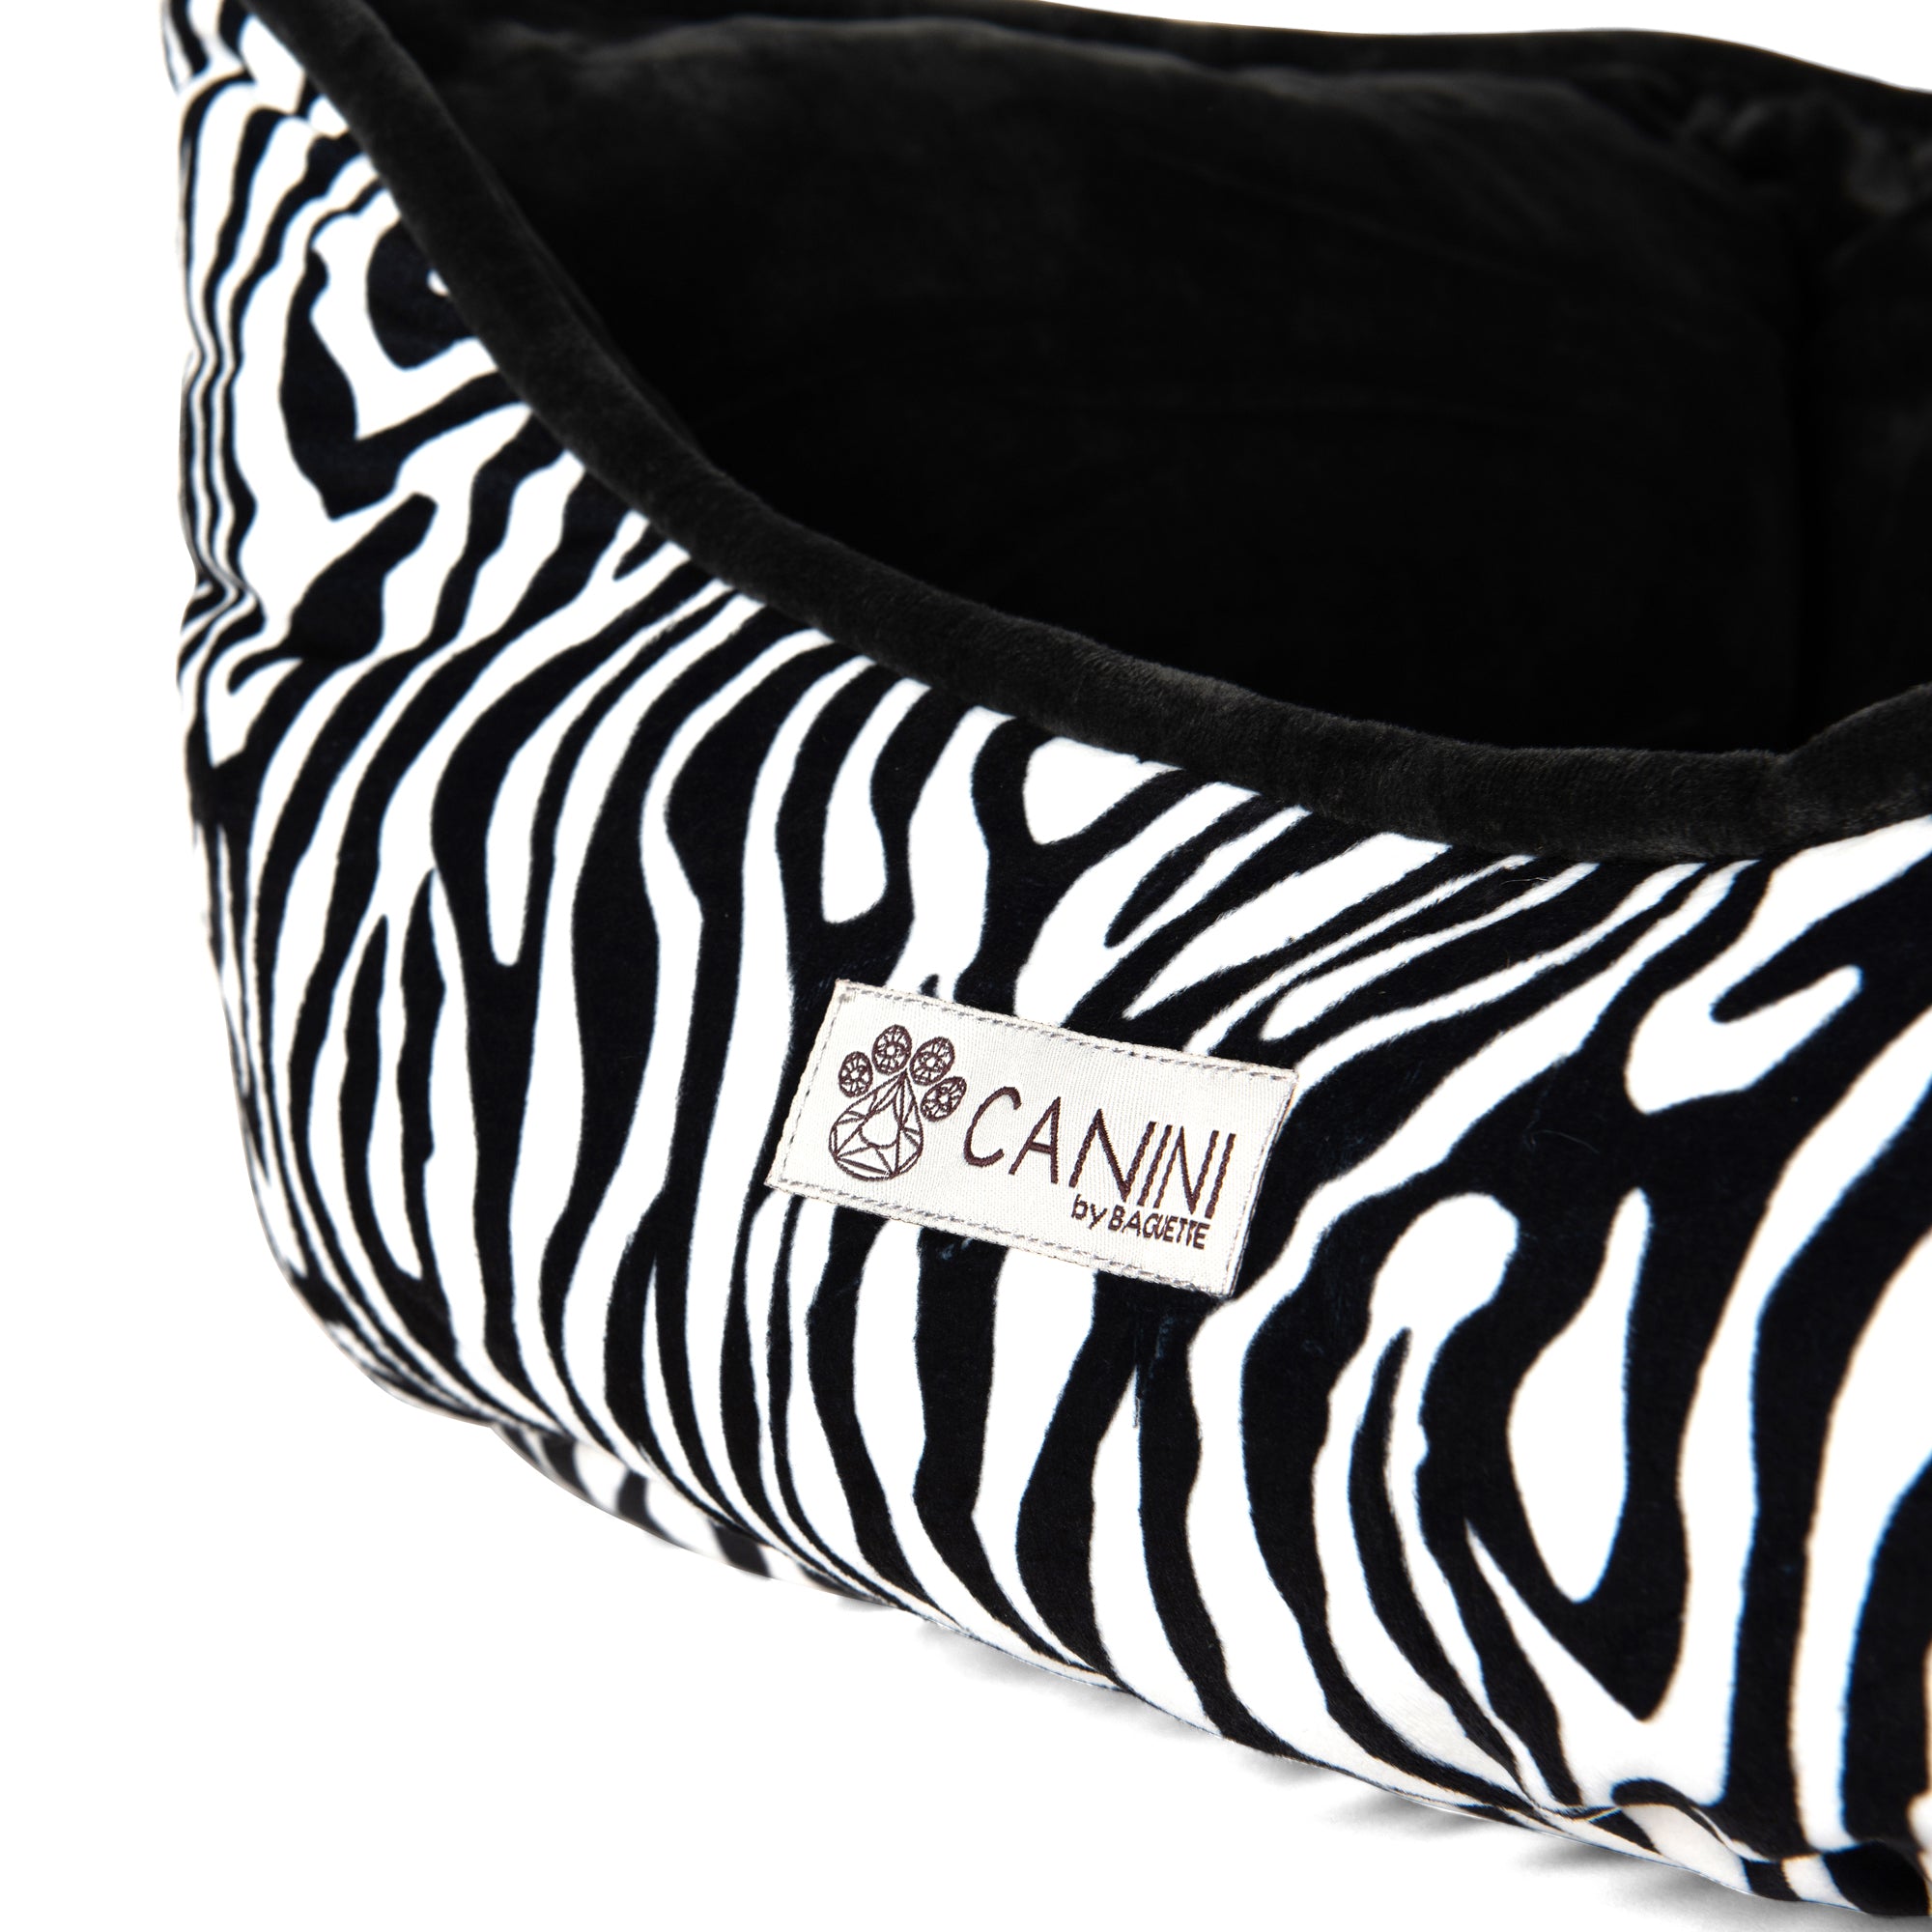 CANINI by Baguette Reversible Micro-Plush Dog Bed for Small-Sized Breeds， Zebra Print